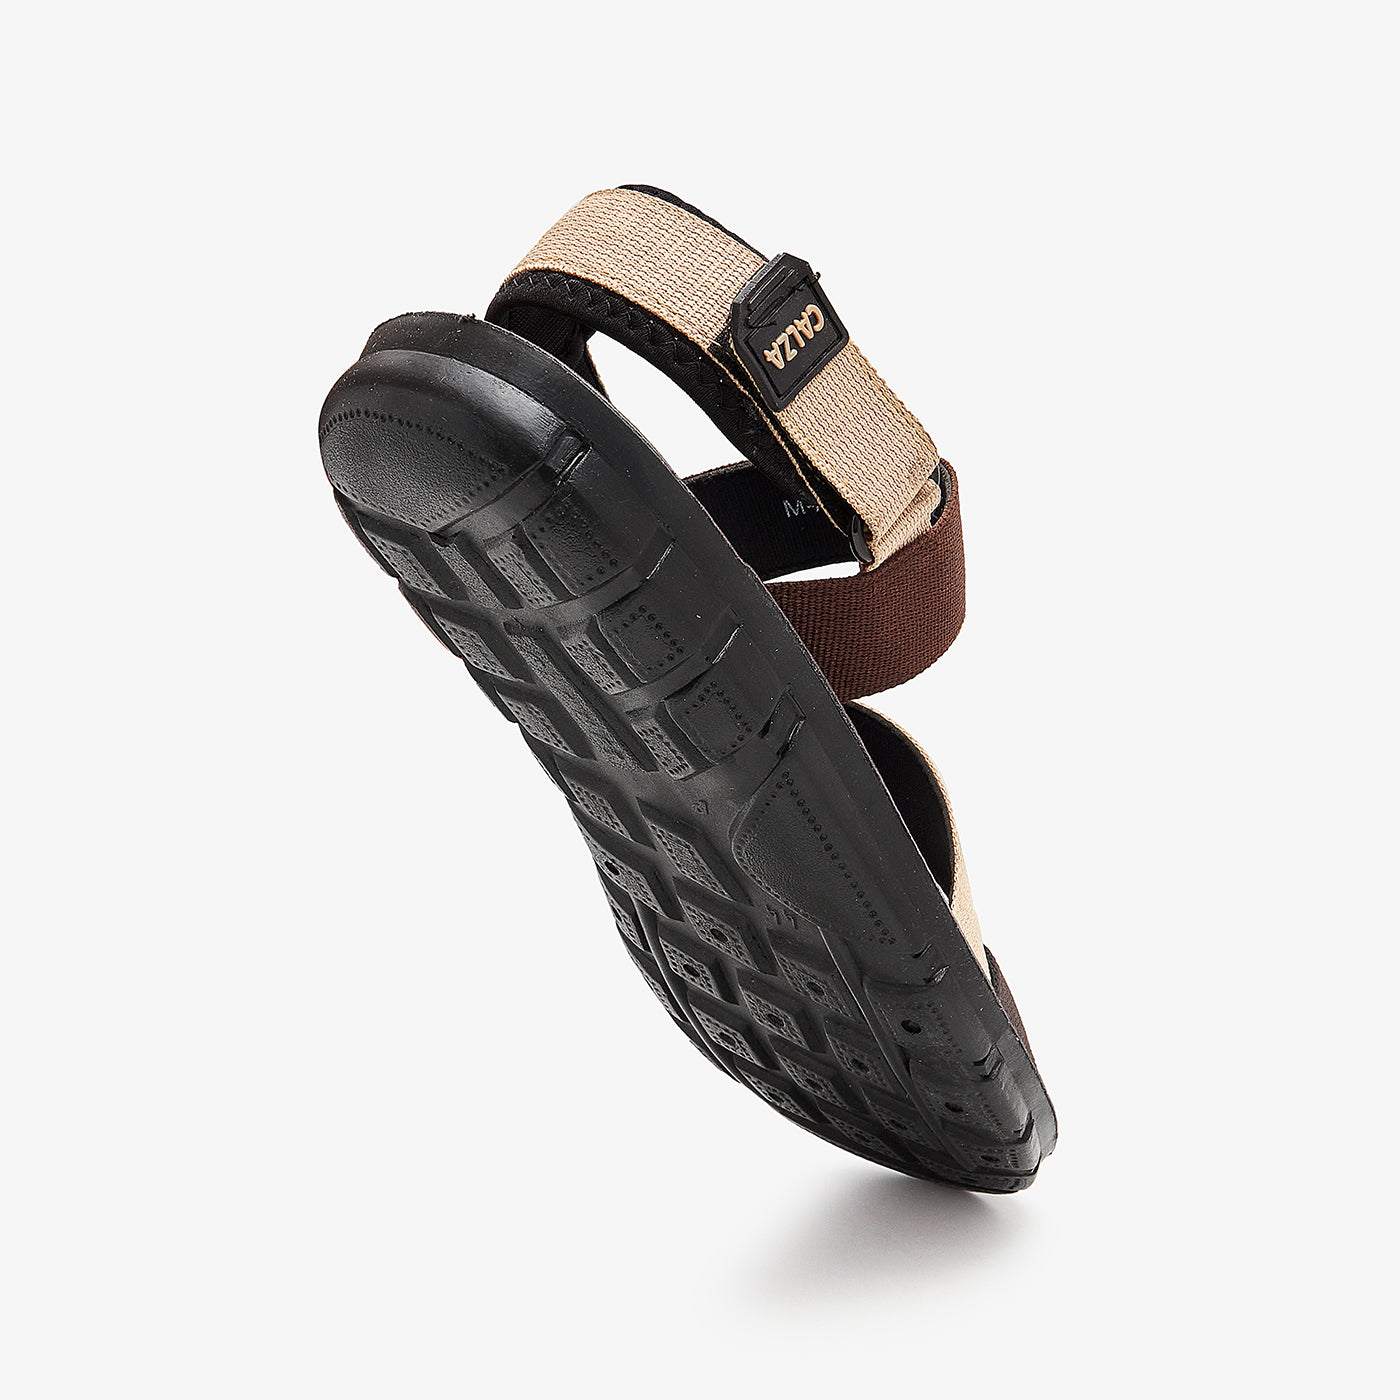 Mens Strapped Sandals